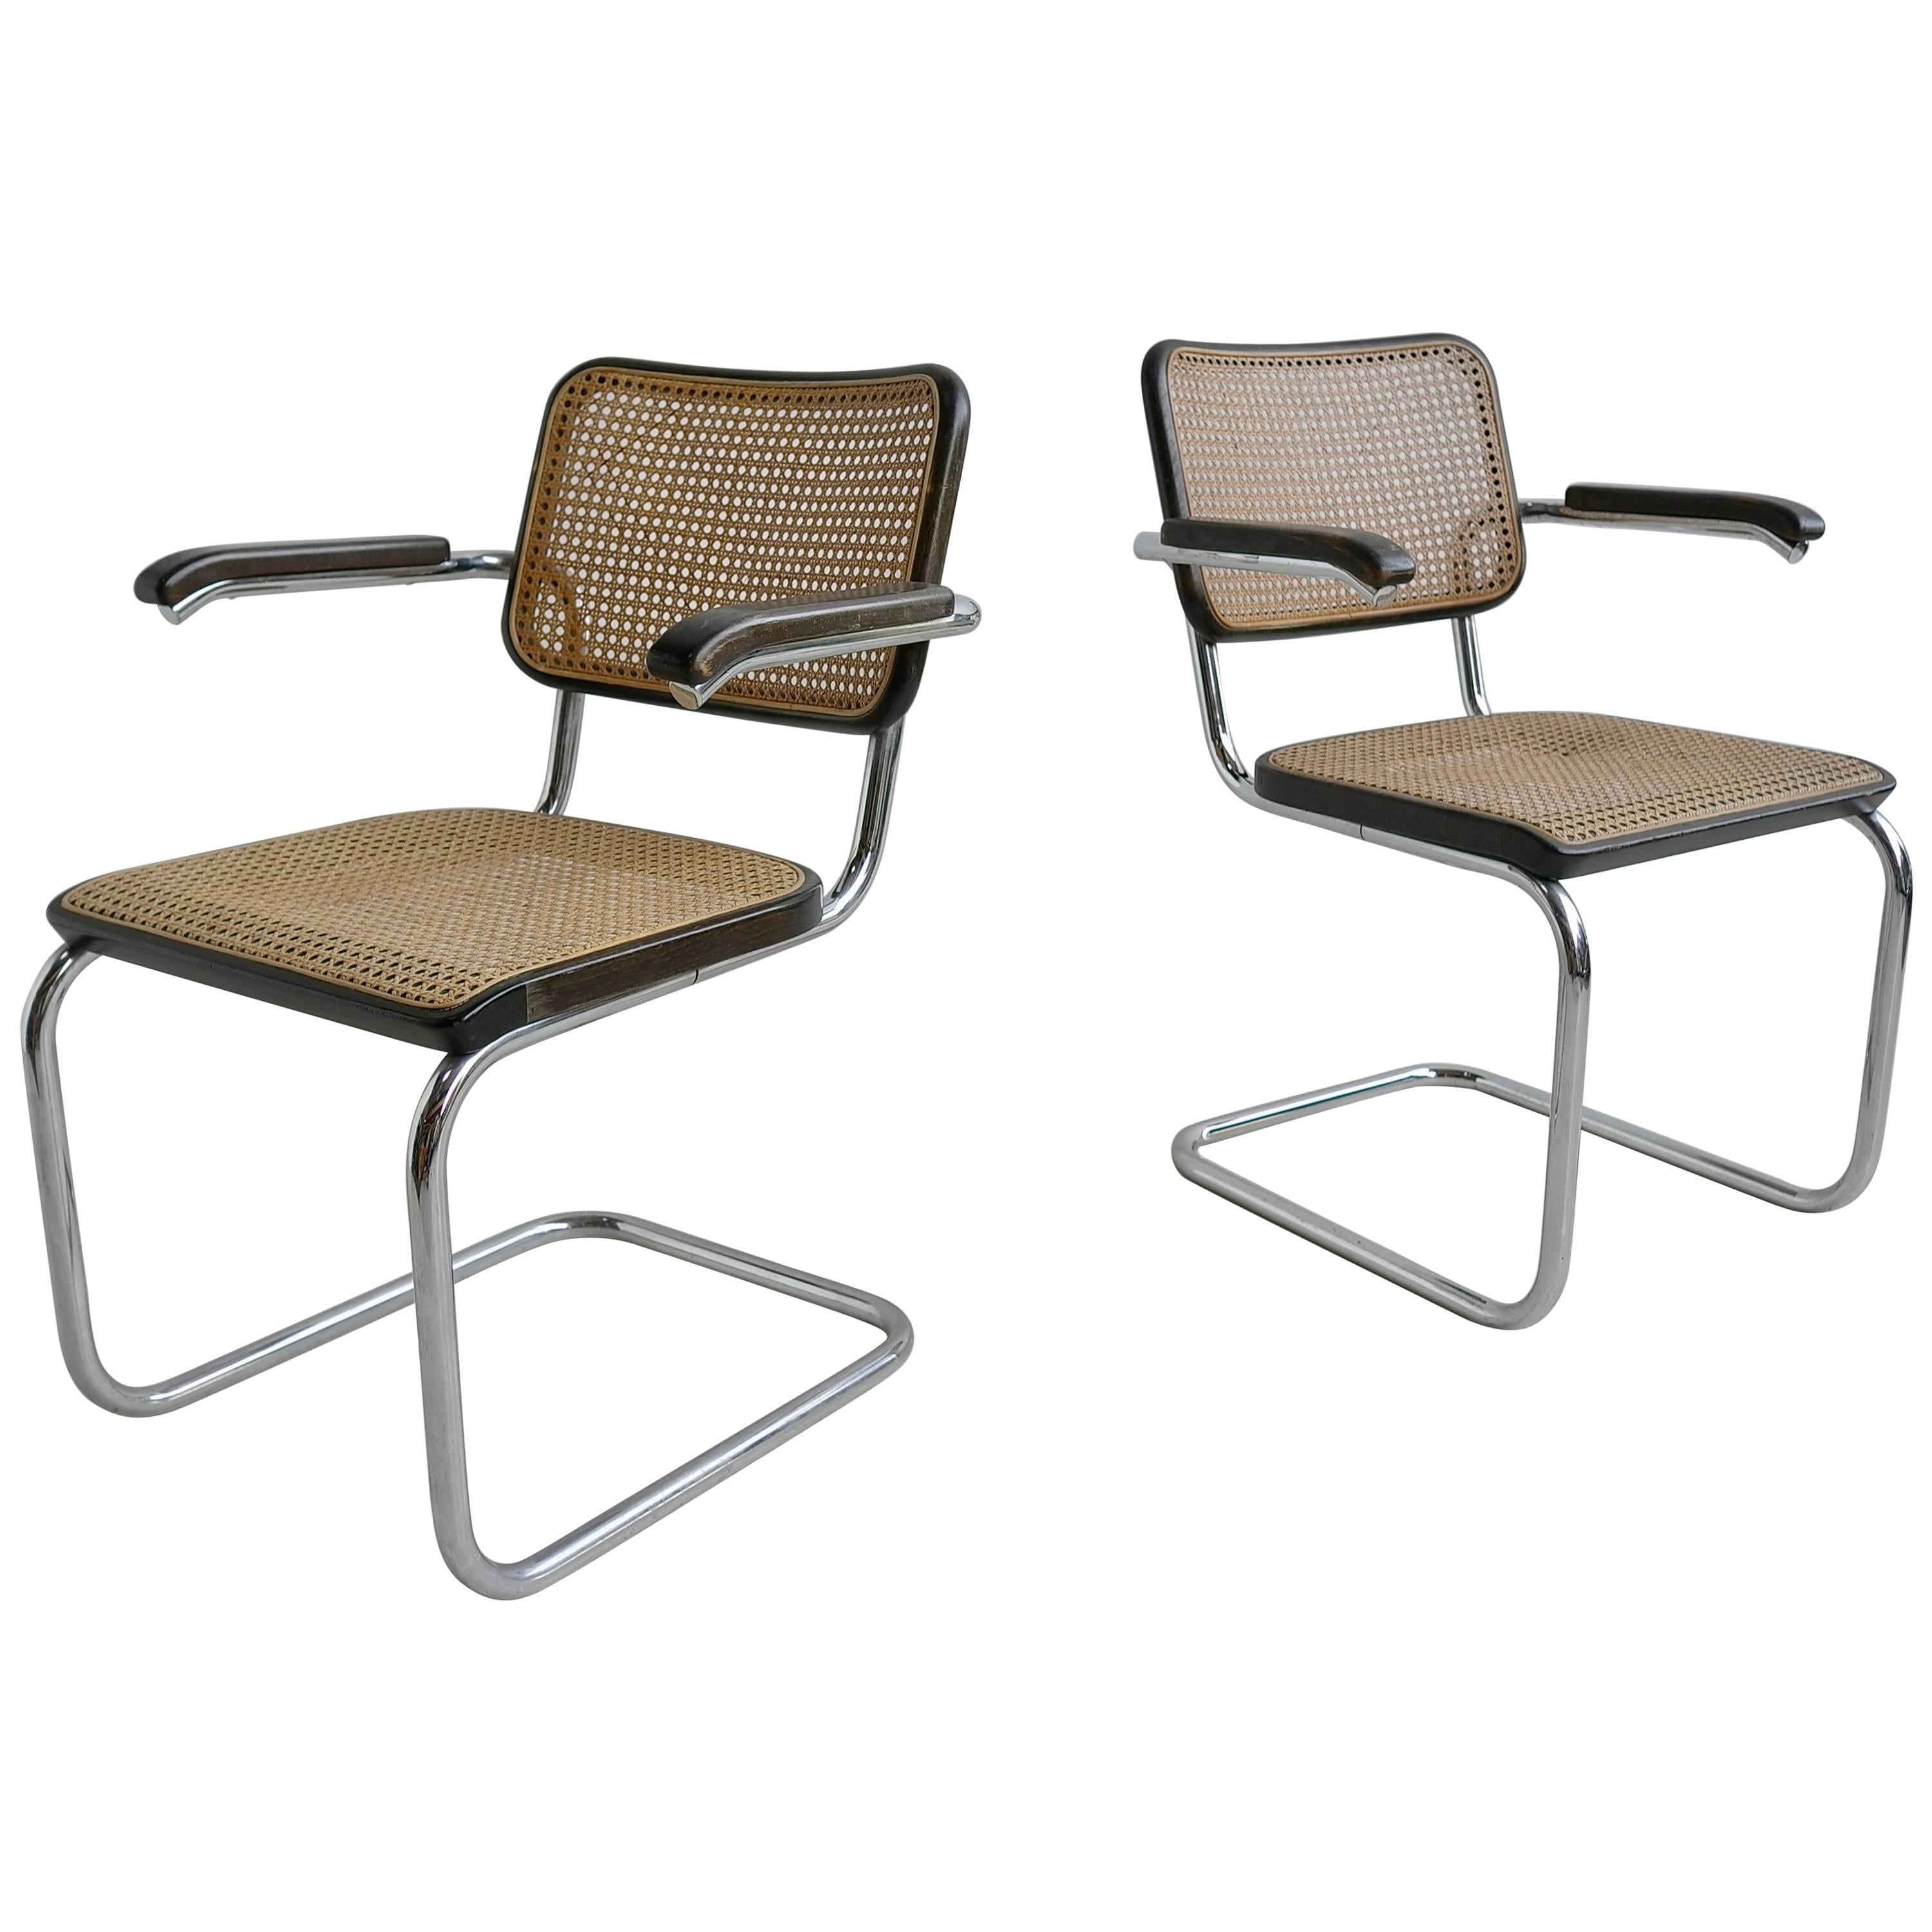 Pair of Marcel Breuer S64 Chairs by Thonet